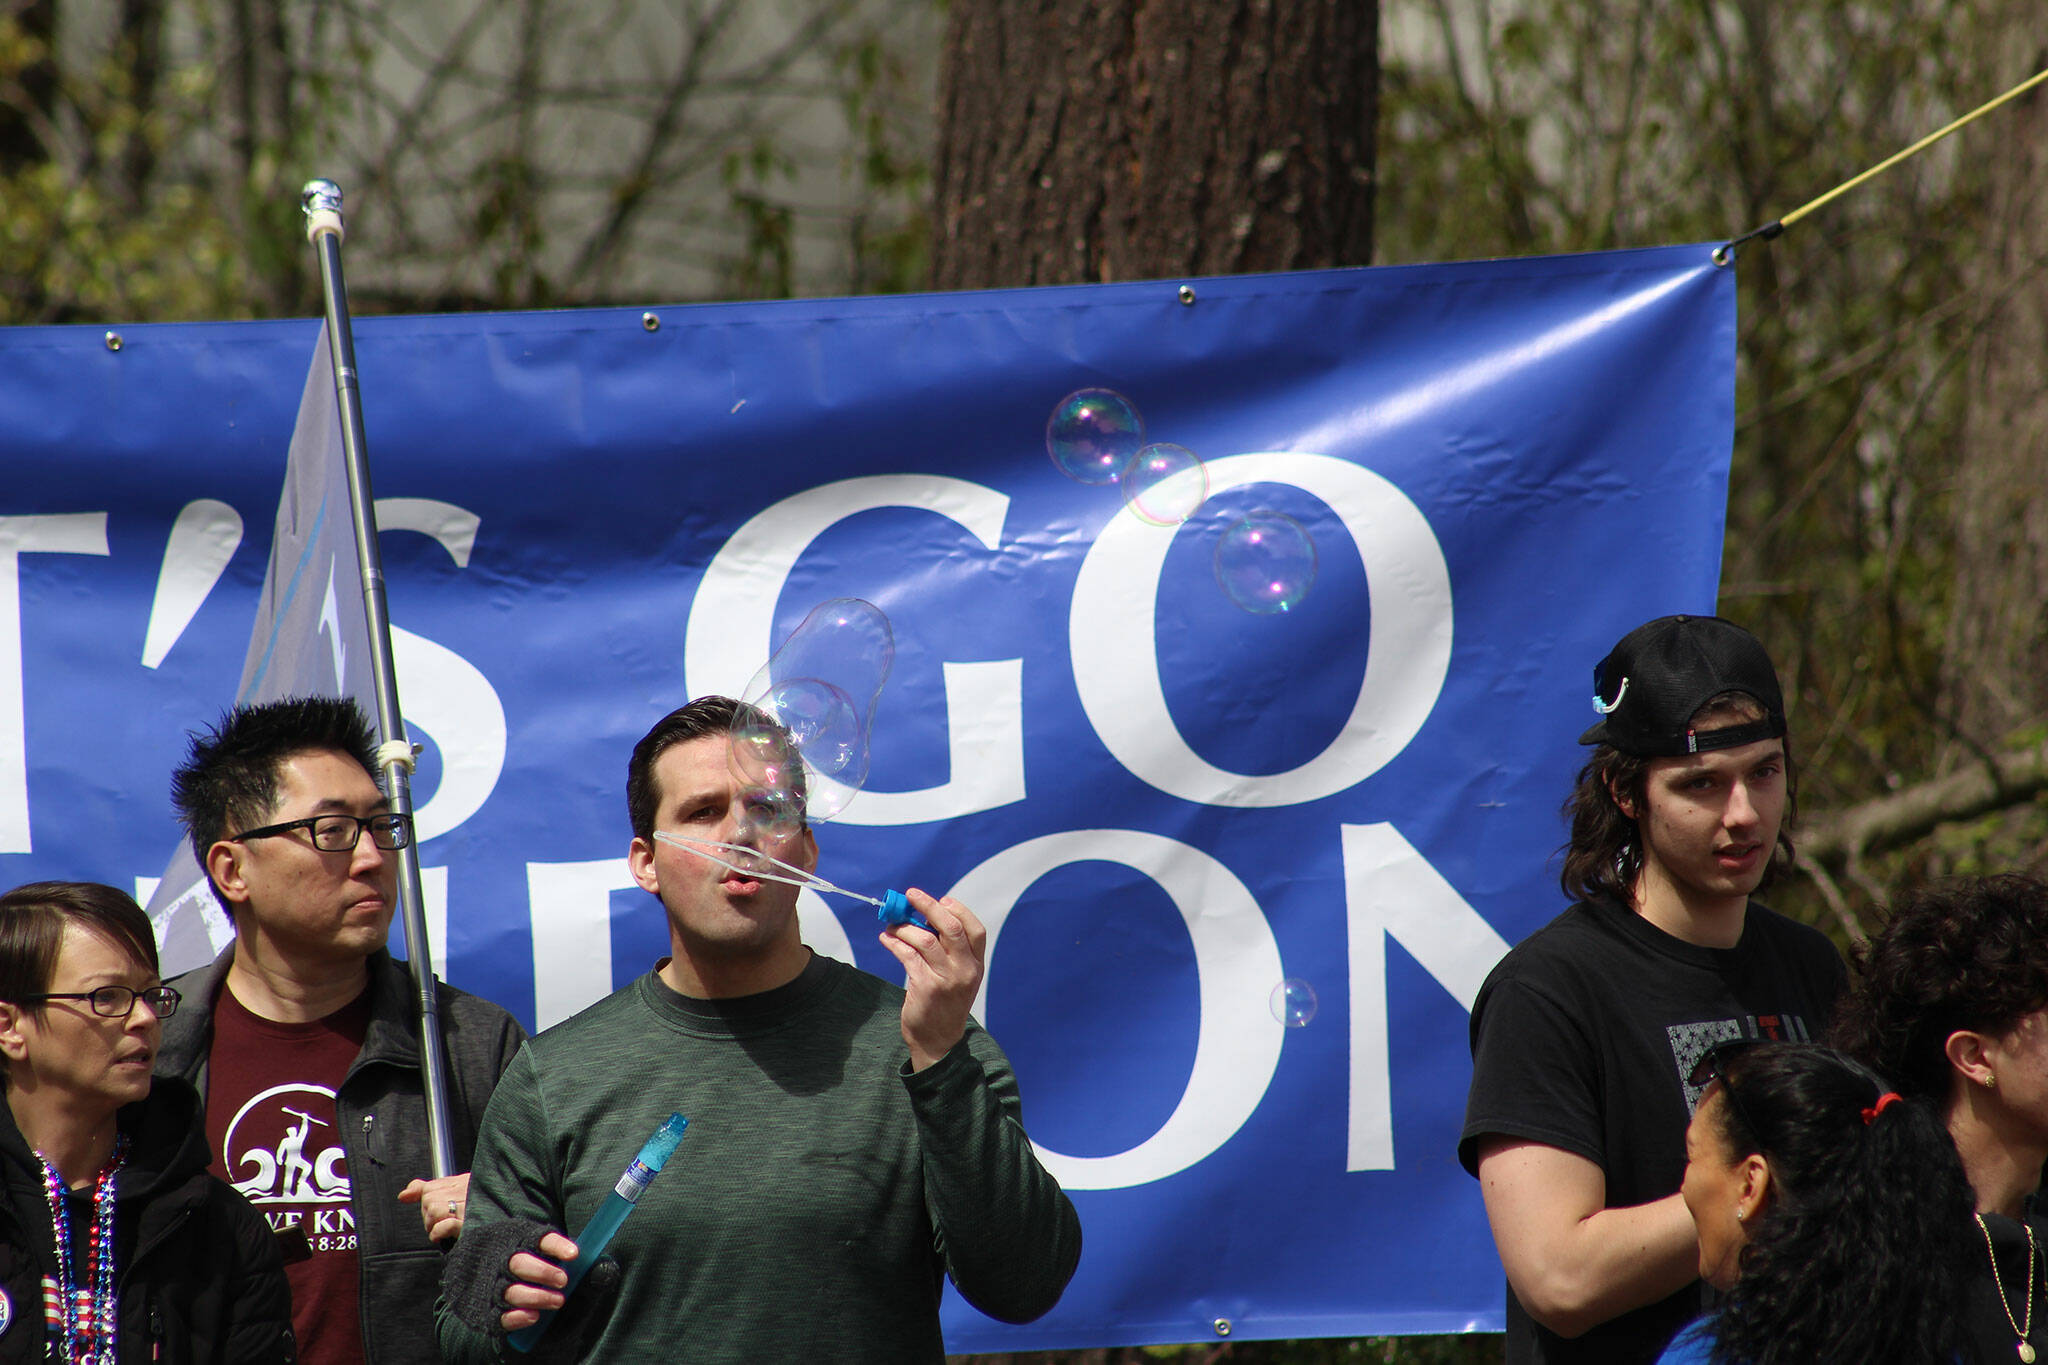 A member of the crowd blows bubbles in front of a giant “LET’S GO BRANDON” sign as the crowd awaits the arrival of President Biden. Photo by Alex Bruell/Sound Publishing